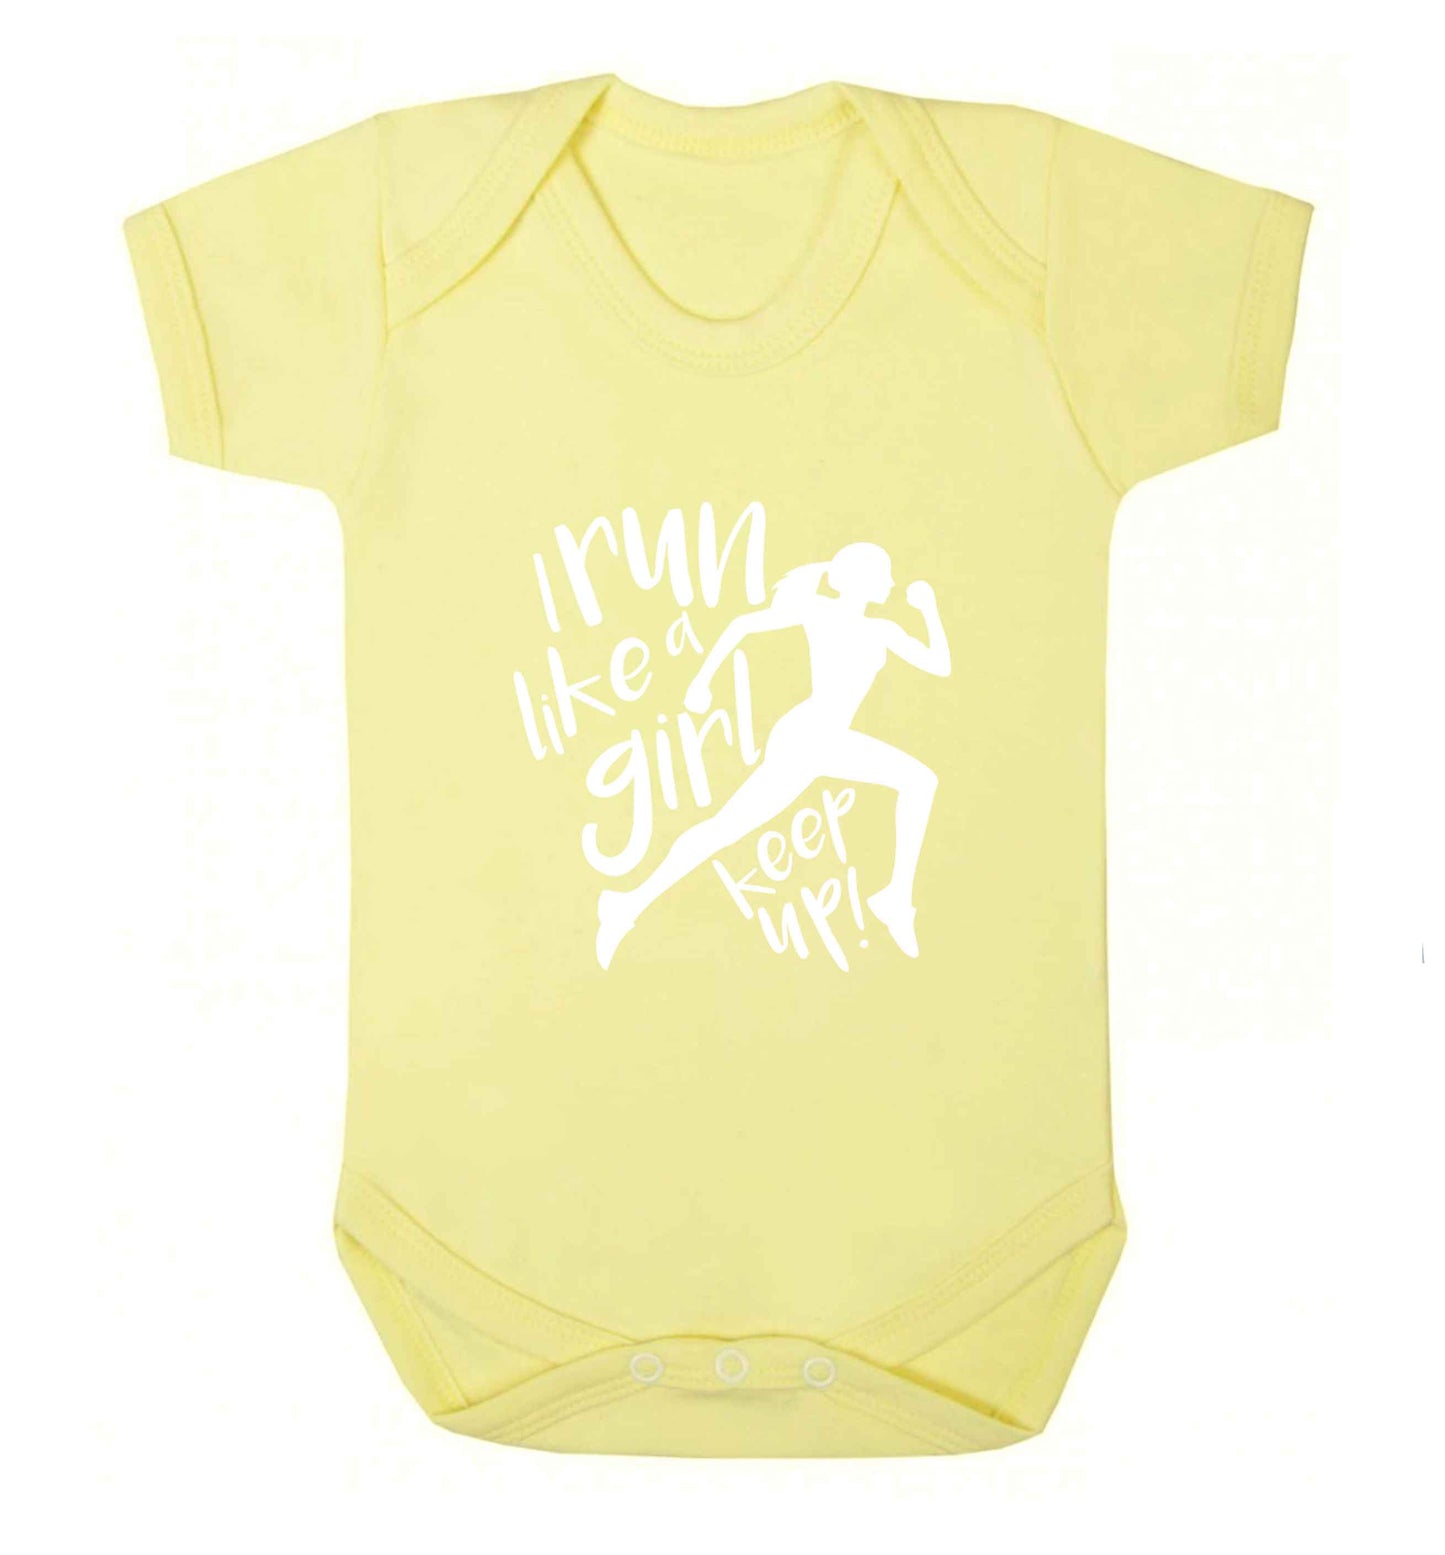 I run like a girl, keep up! baby vest pale yellow 18-24 months